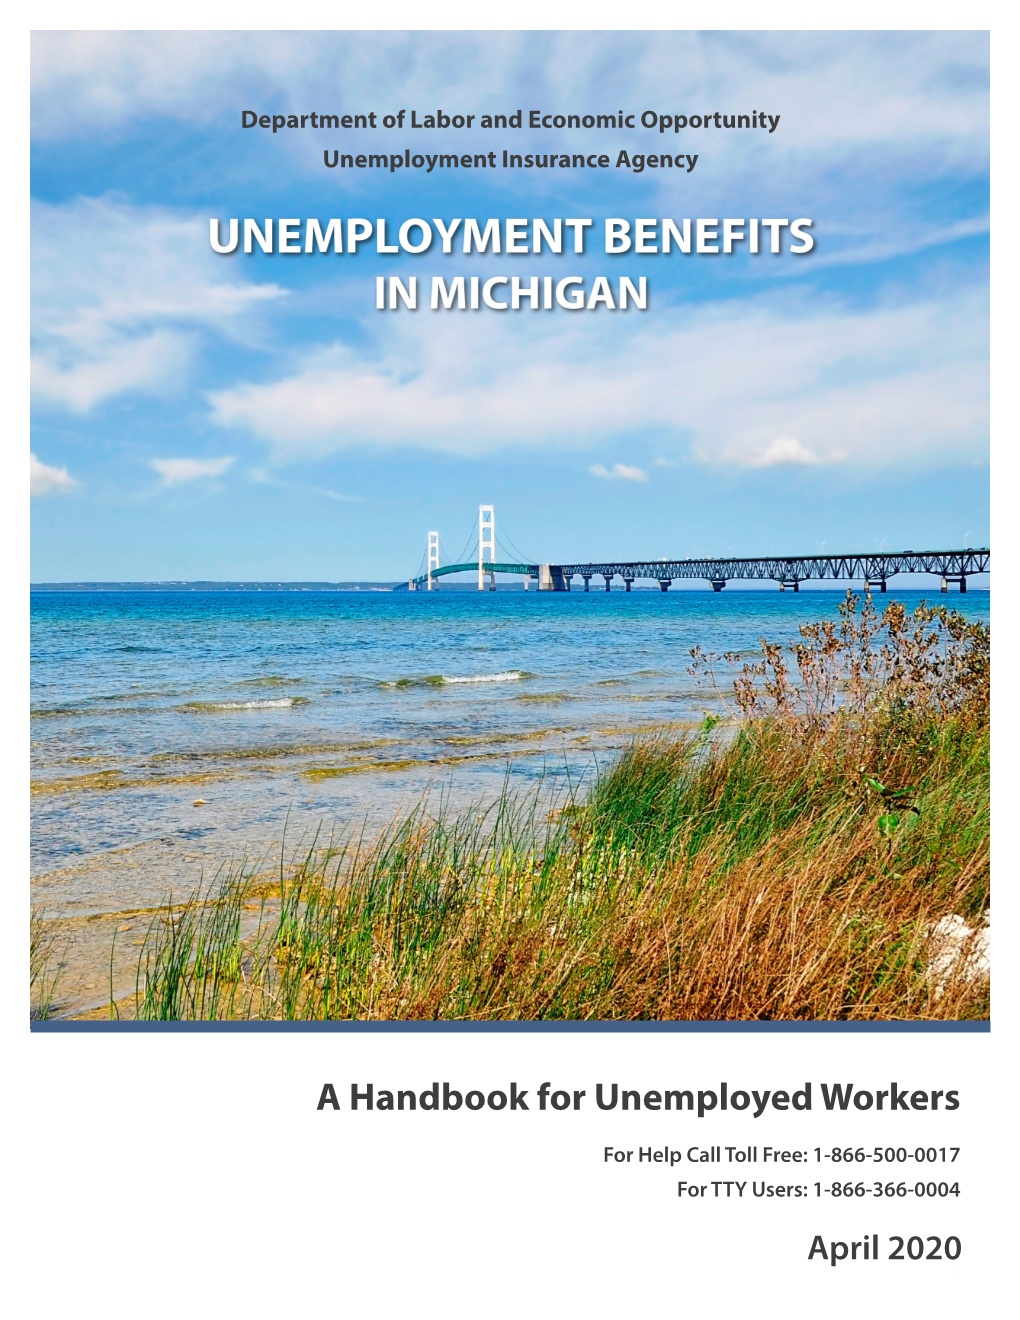 A Handbook for Unemployed Workers